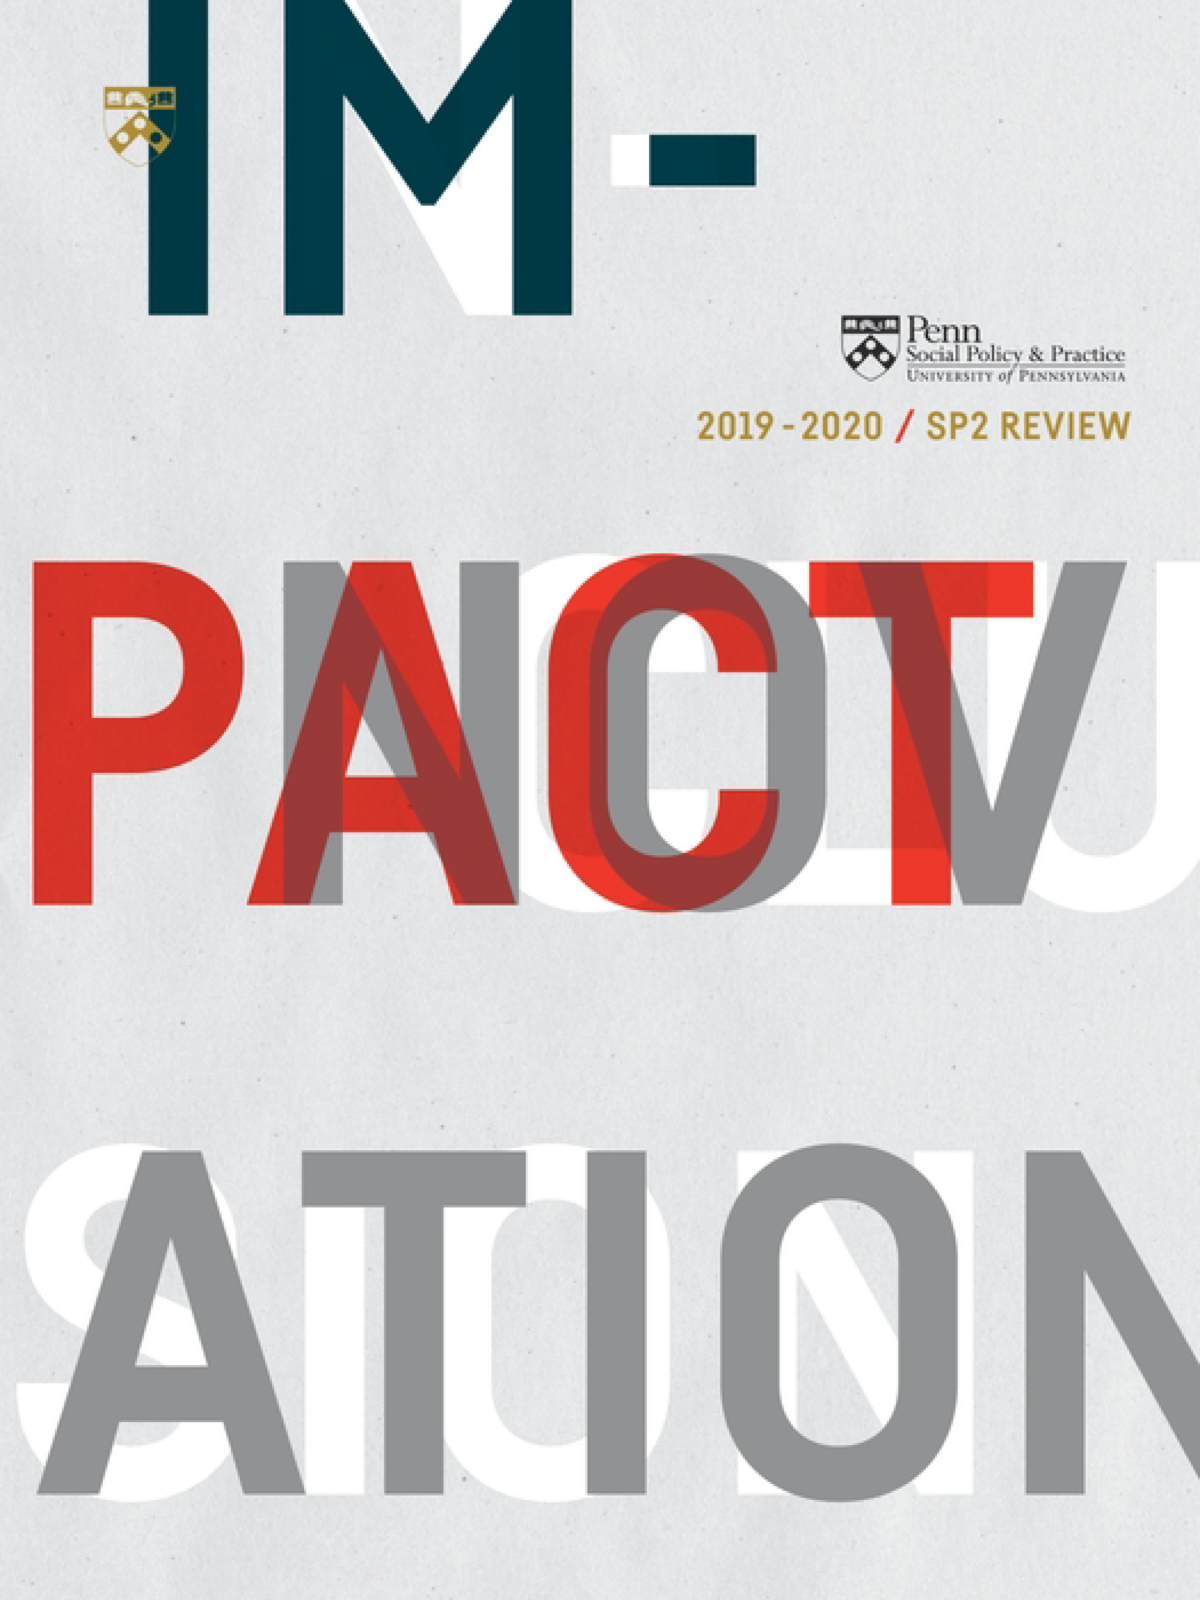 2019-2020 SP2 Review cover; gray background with words impact, innovation, inclusion